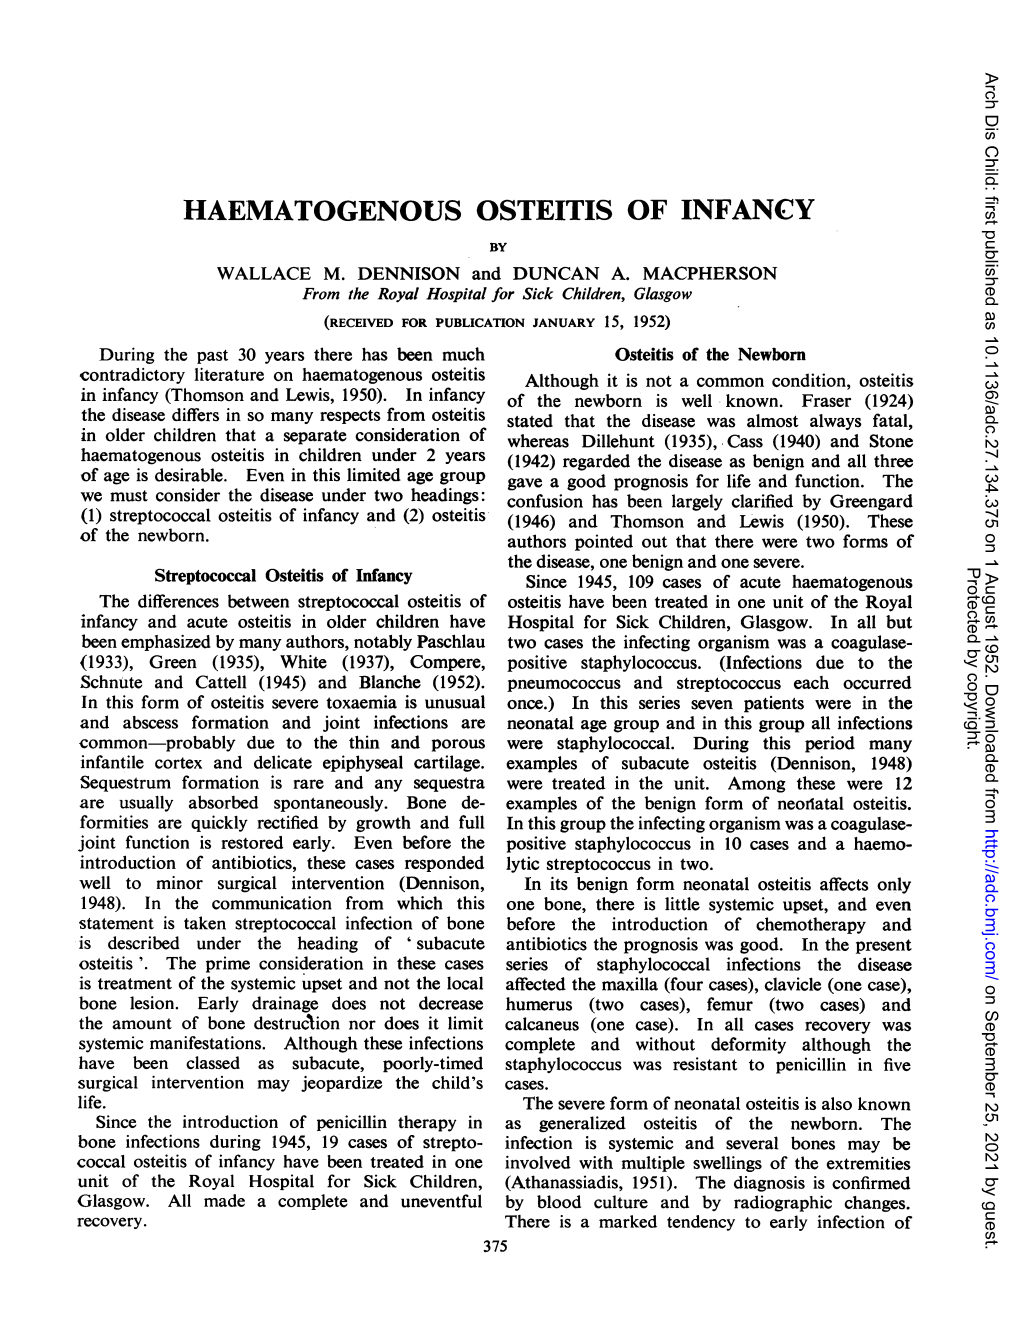 Haematogenous Osteitis of Infancy by Wallace M